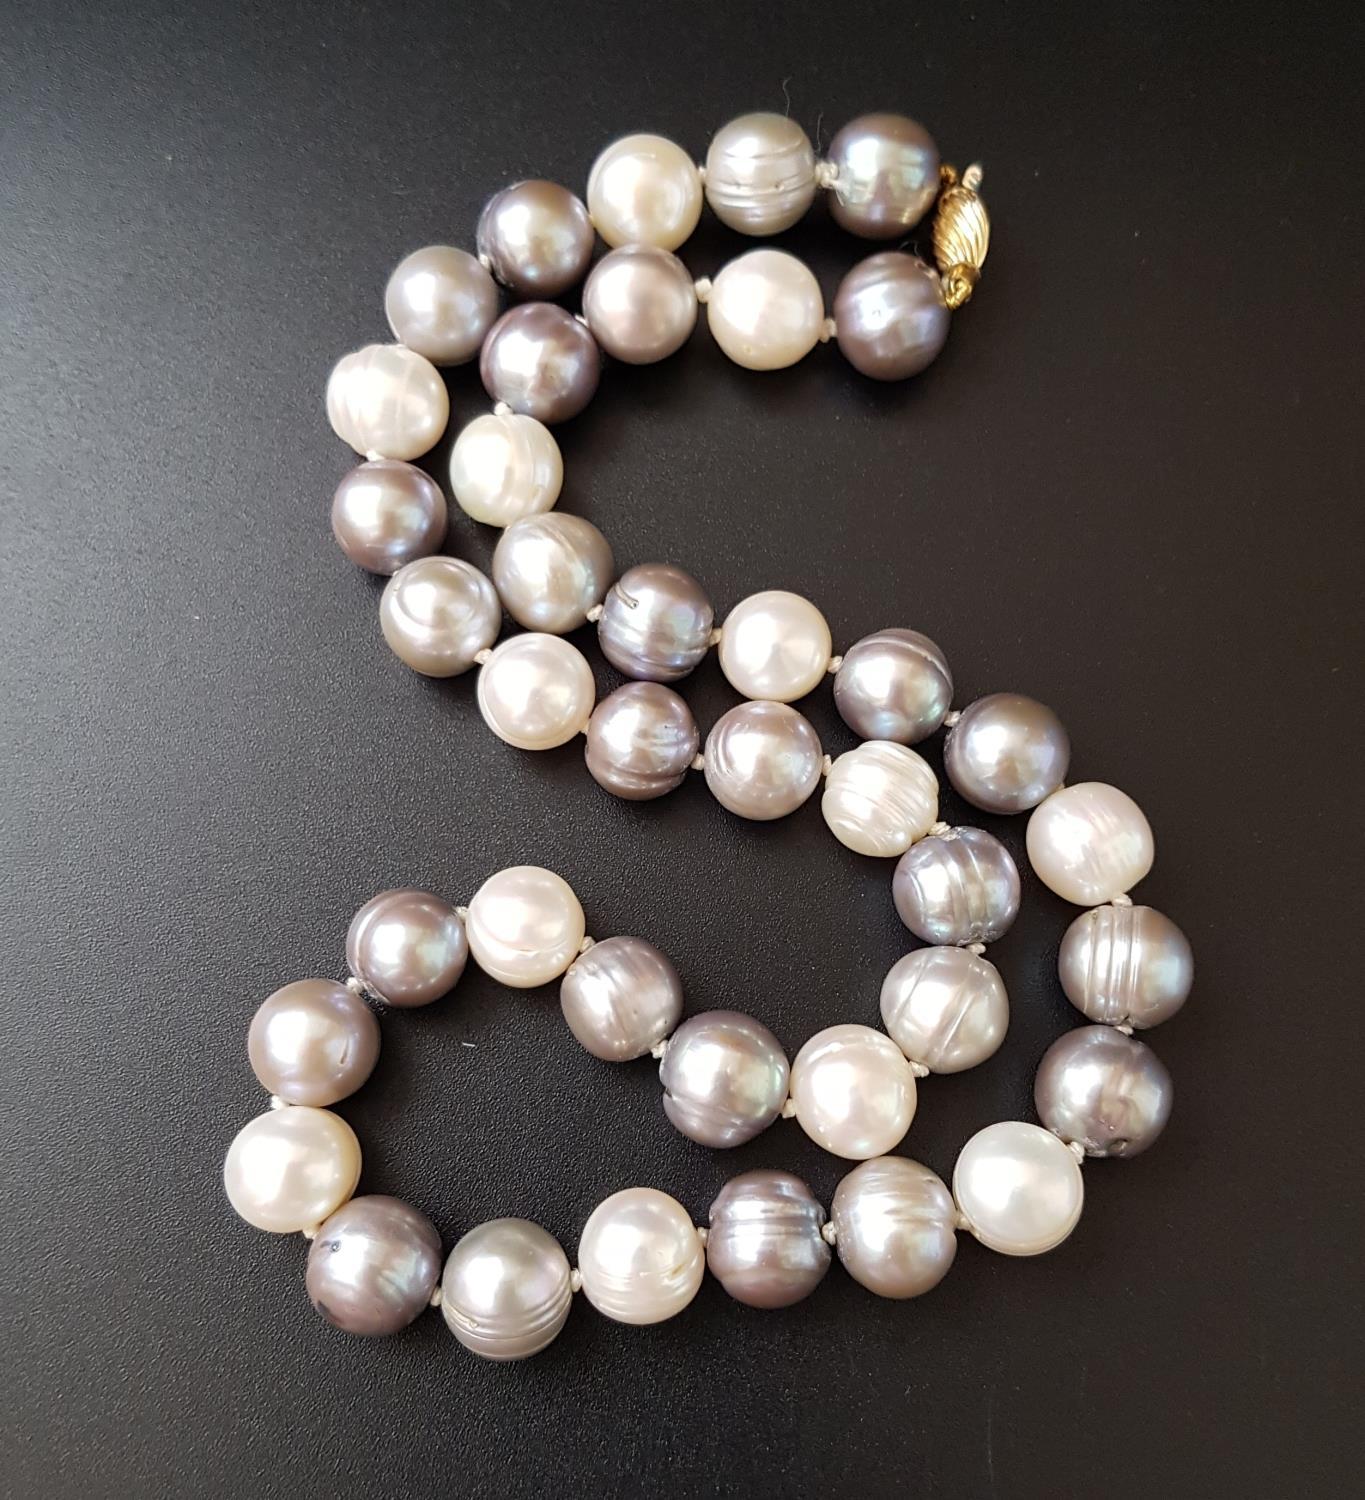 TRI-COLOUR CULTURED PEARL NECKLACE with white, light grey and dark grey pearls, with nine carat gold